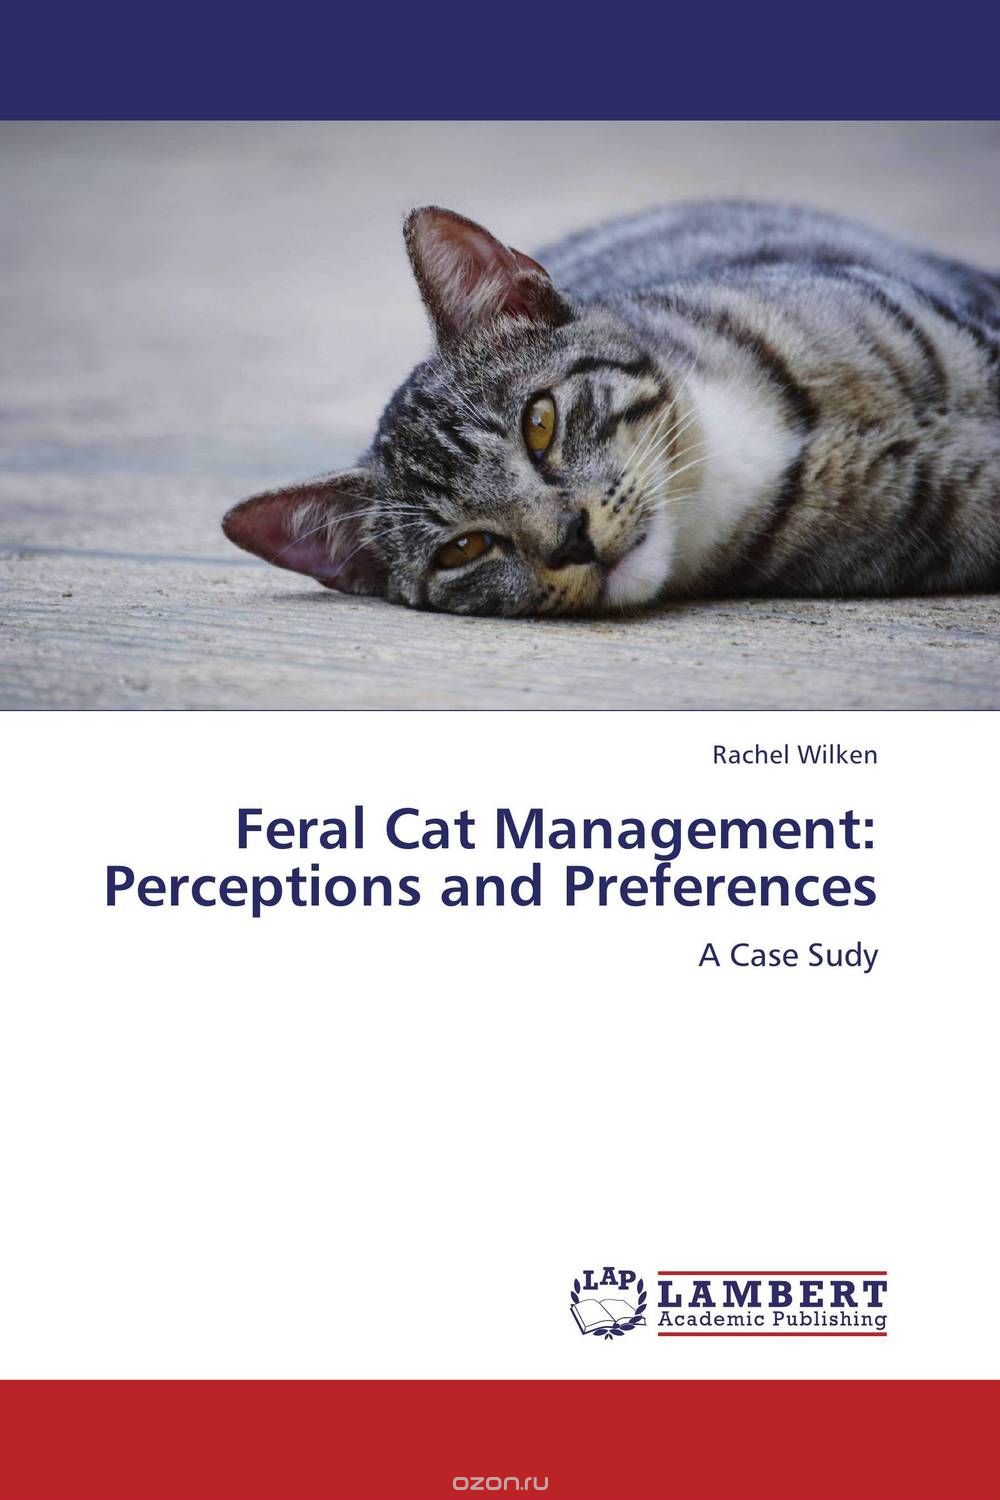 Feral Cat Management: Perceptions and Preferences